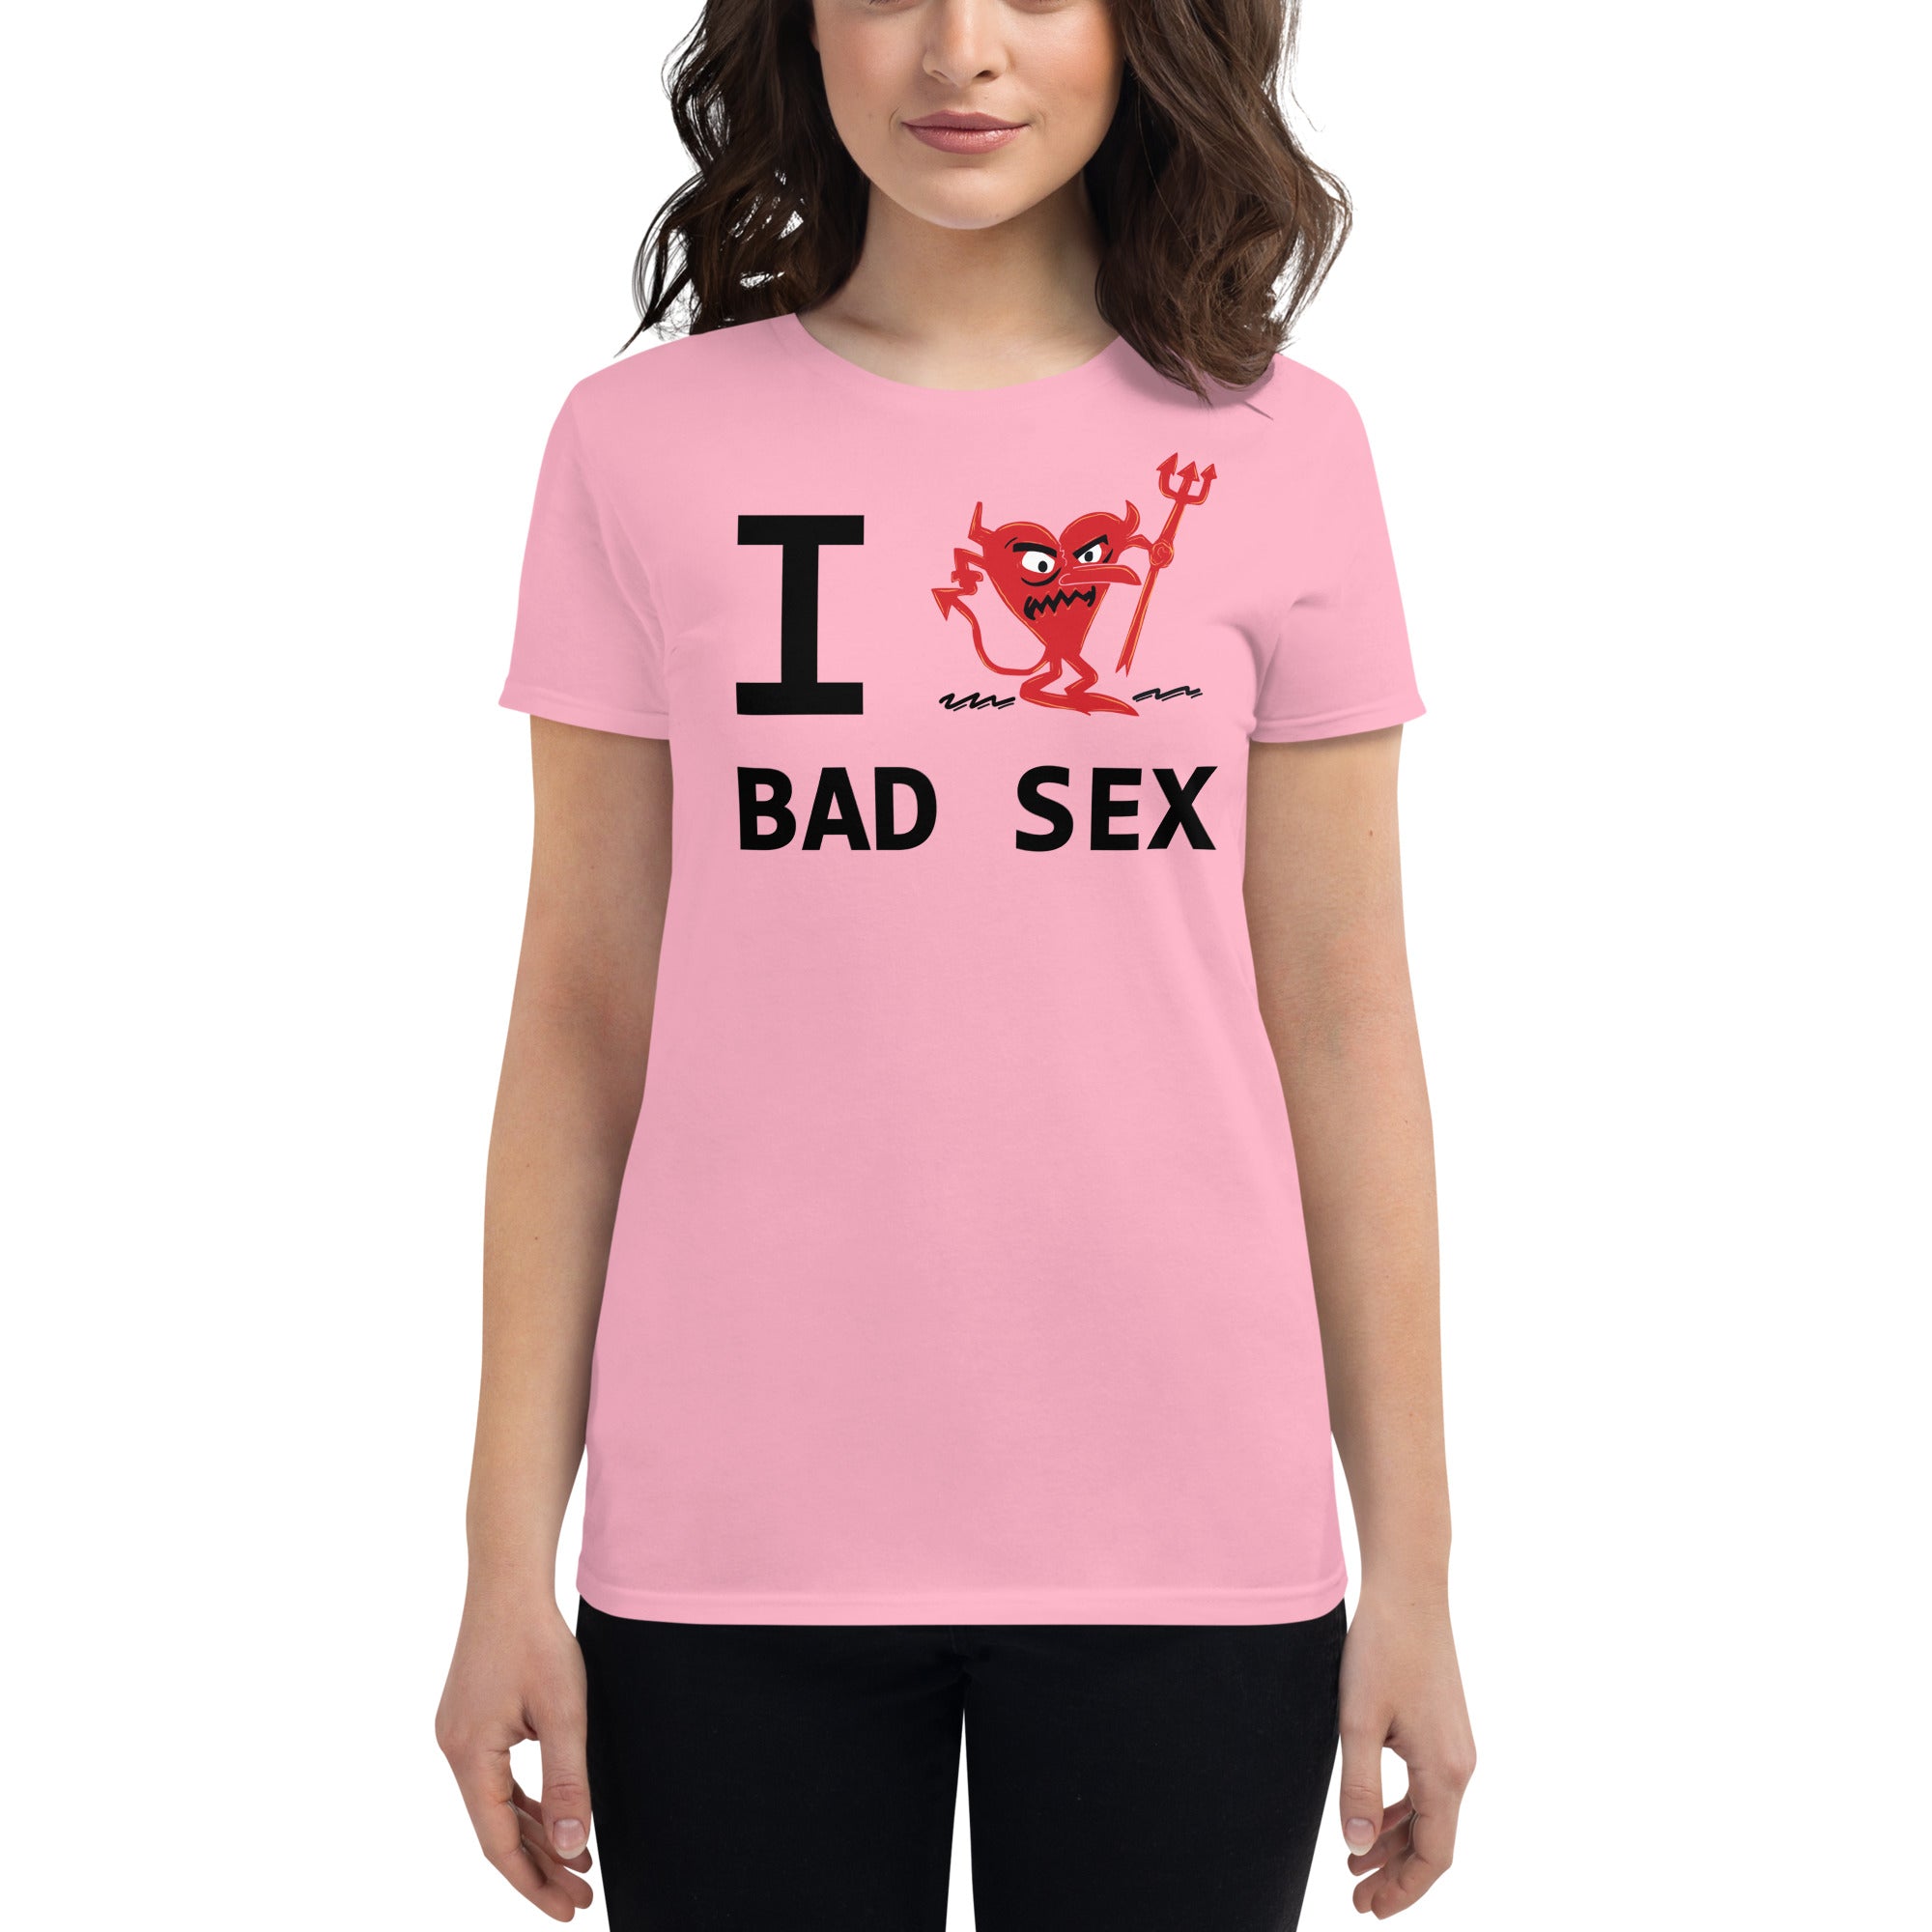 BAD SEX Womens short sleeve t-shirt — CRAZY HATE photo picture